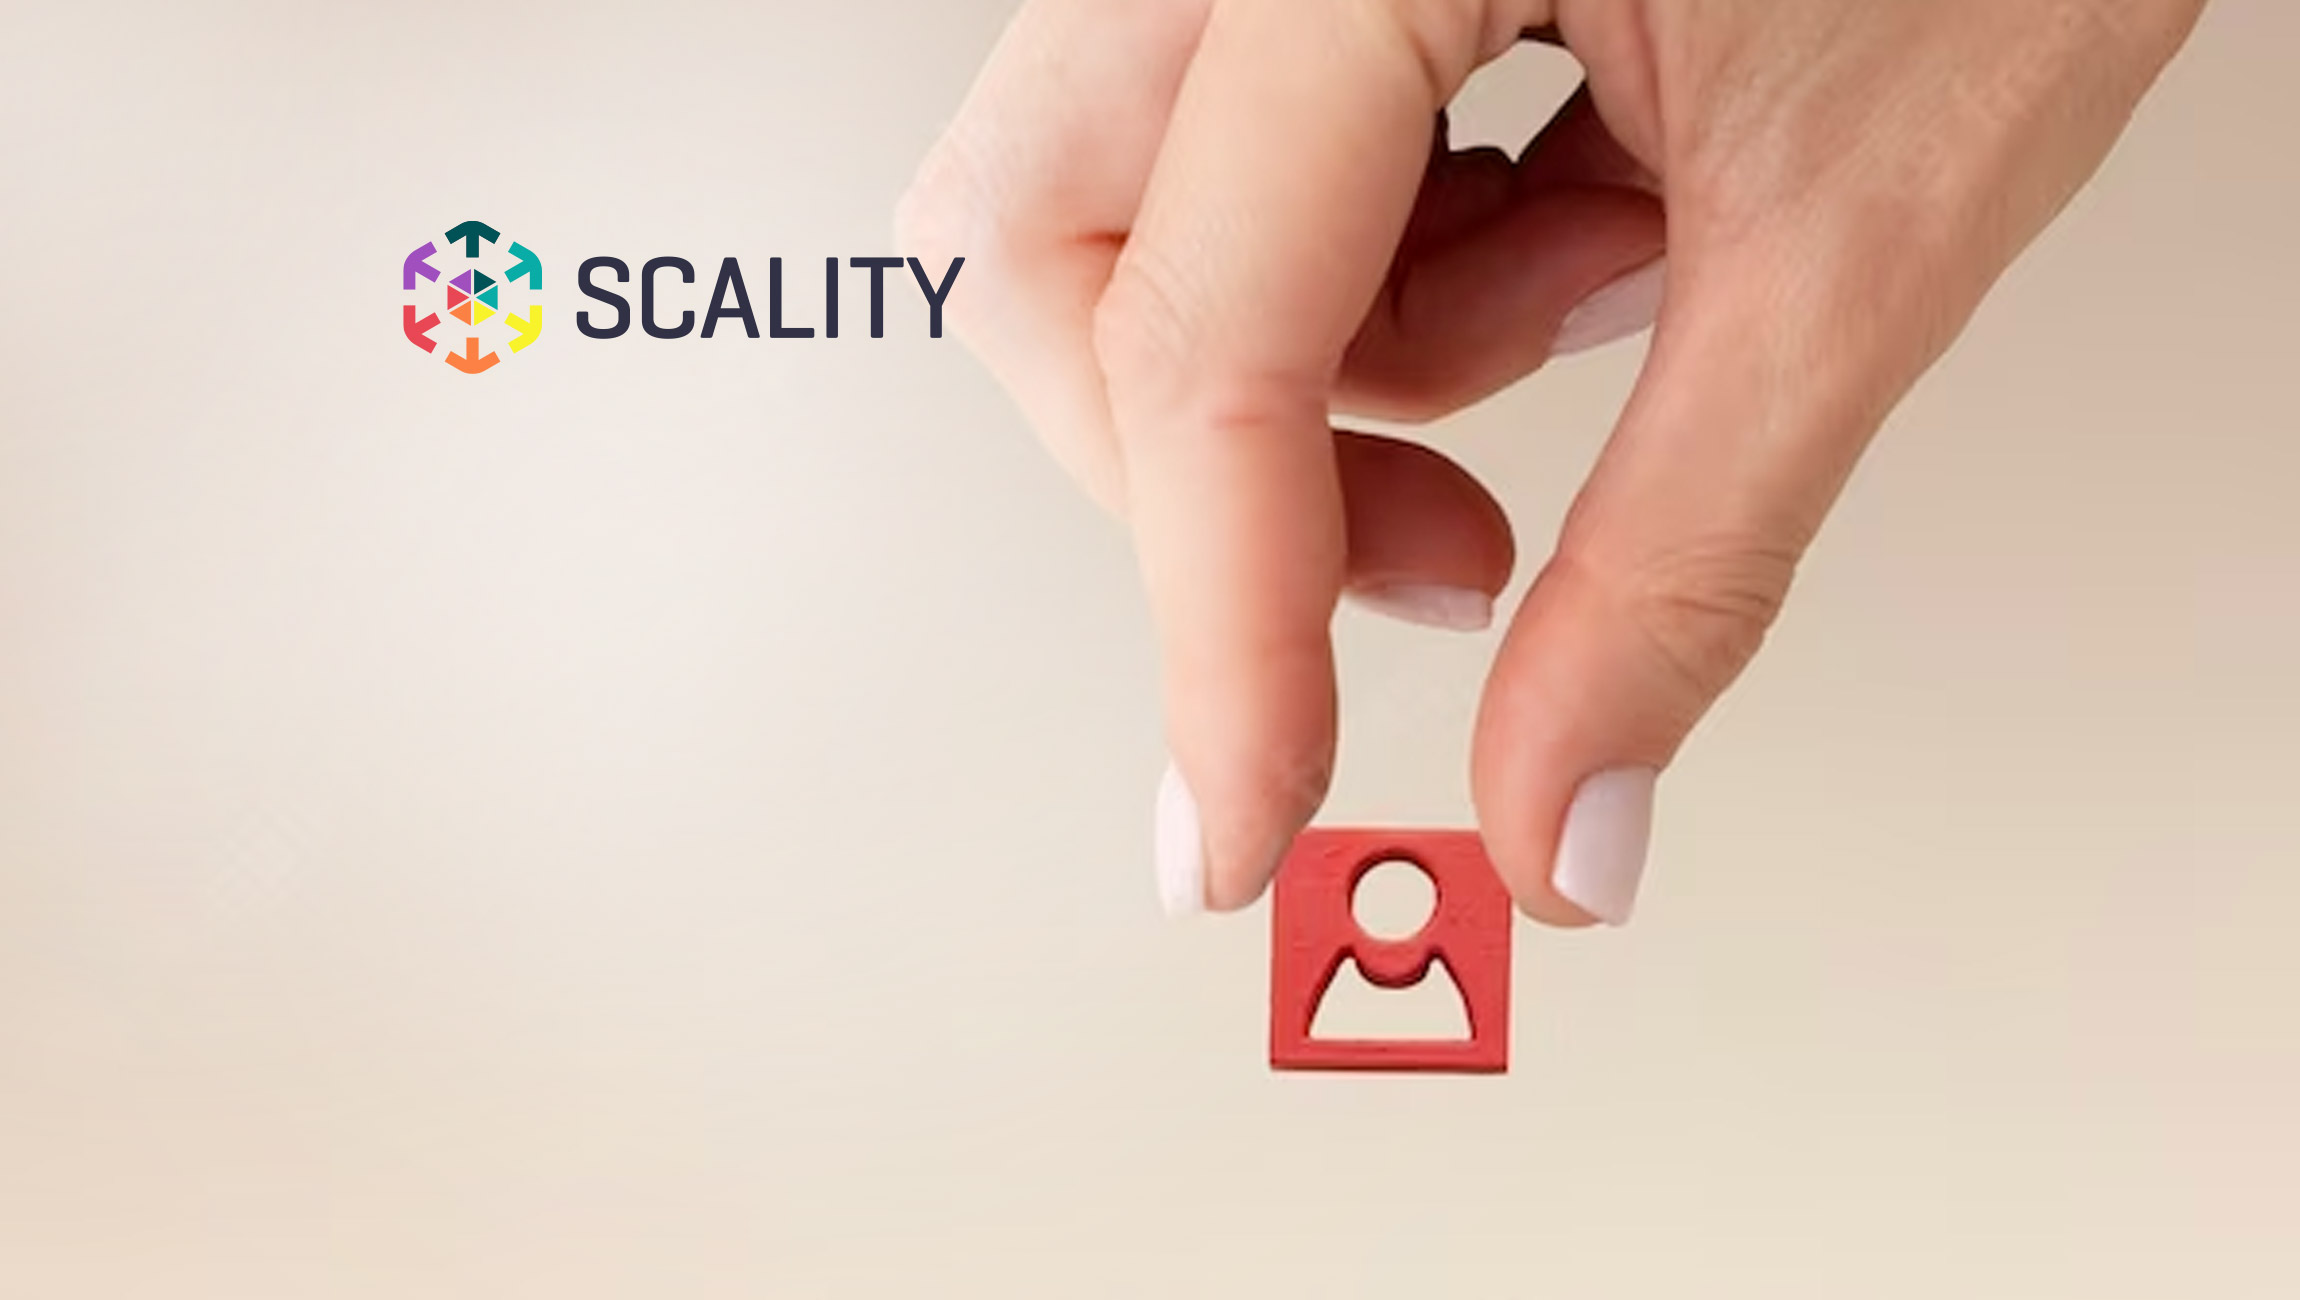 Scality appoints Paul Repice as Vice President of Sales for the Americas